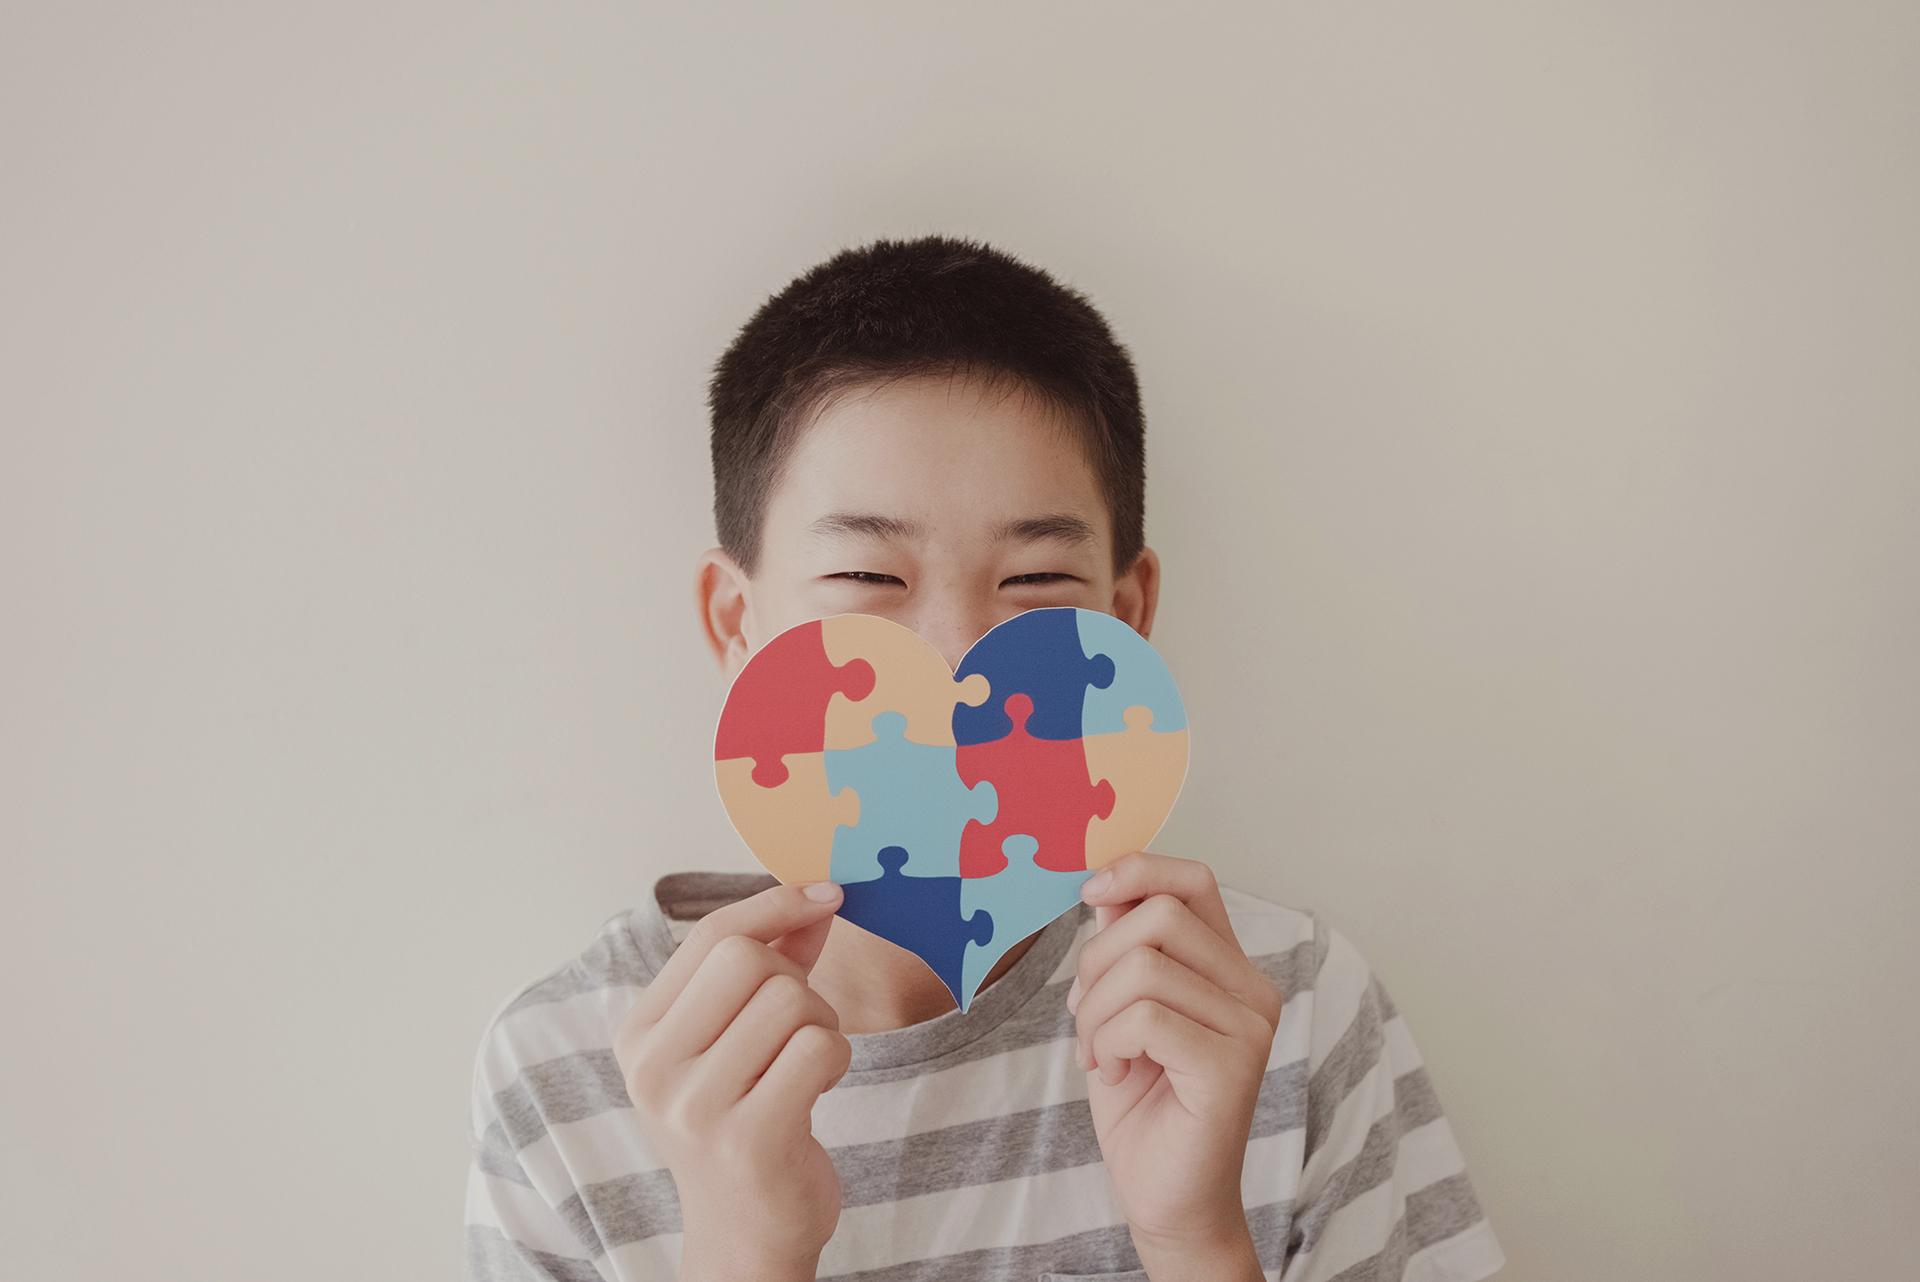 Autism Spectrum Disorder: Risk Factors, Treatment and Therapies